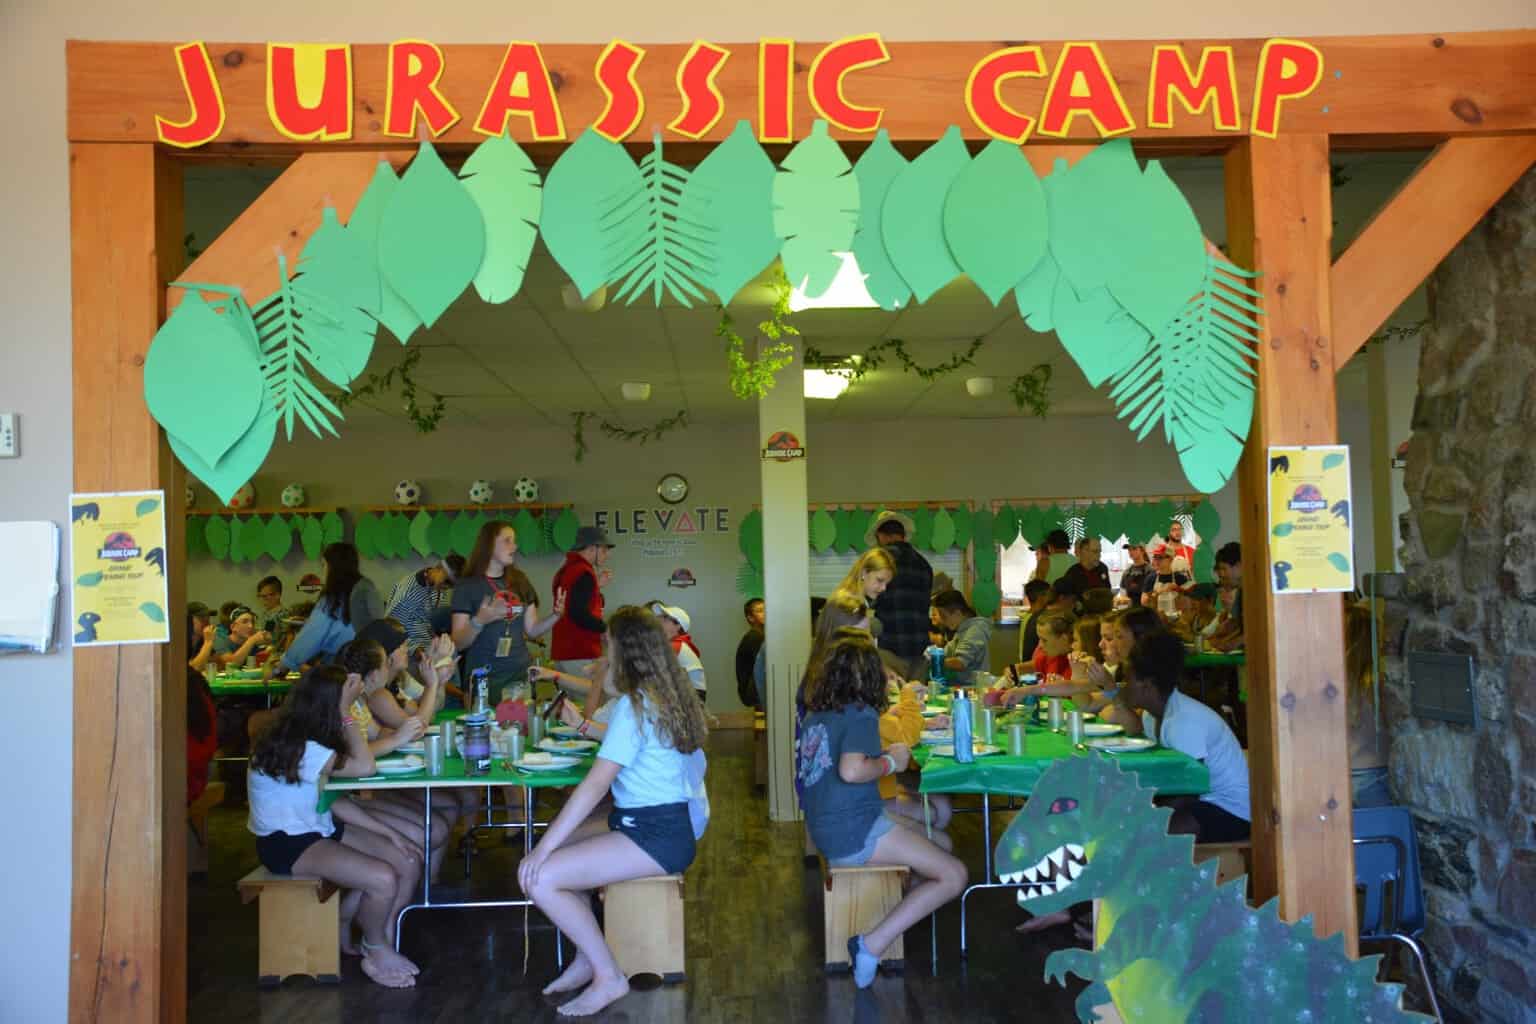 Welcome to Jurassic Camp!